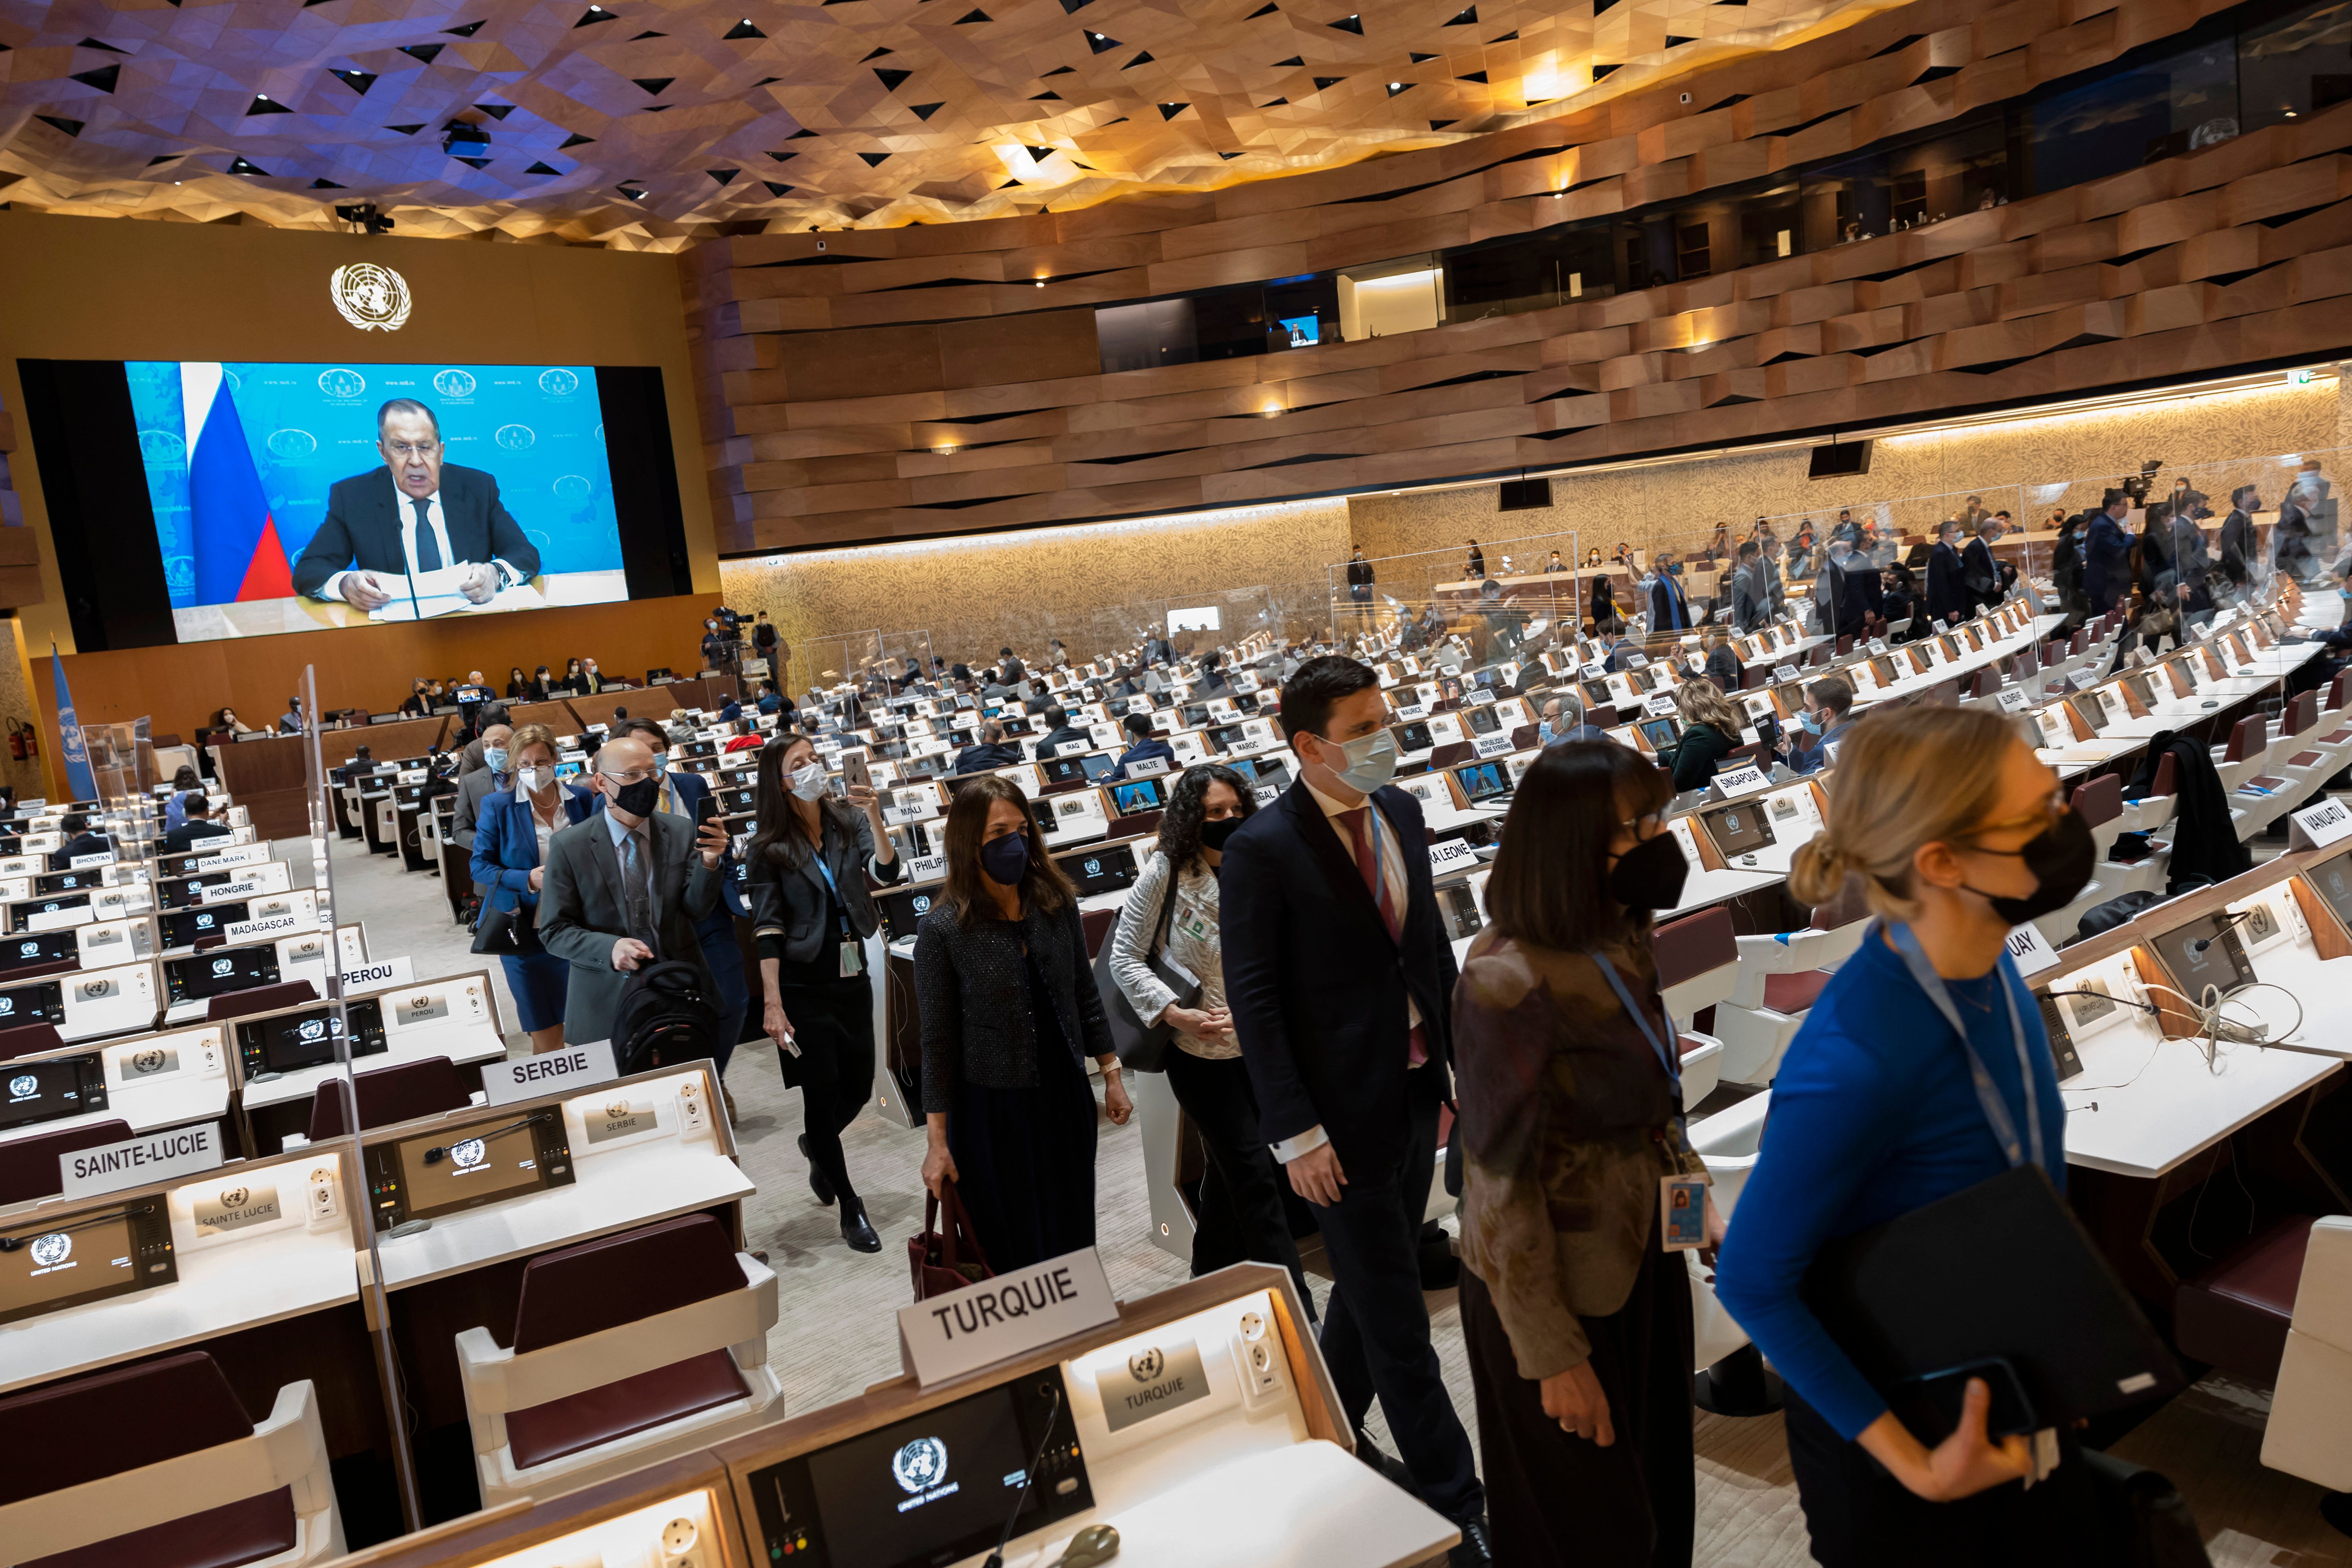 Ambassadors and diplomats leave while Russia's foreign minister Sergei Lavrov (on screen) addresses with a pre-recorded video message at the 49th session of the UN Human Rights Council at the European headquarters of the United Nations in Geneva, Switzerland, on March 1.